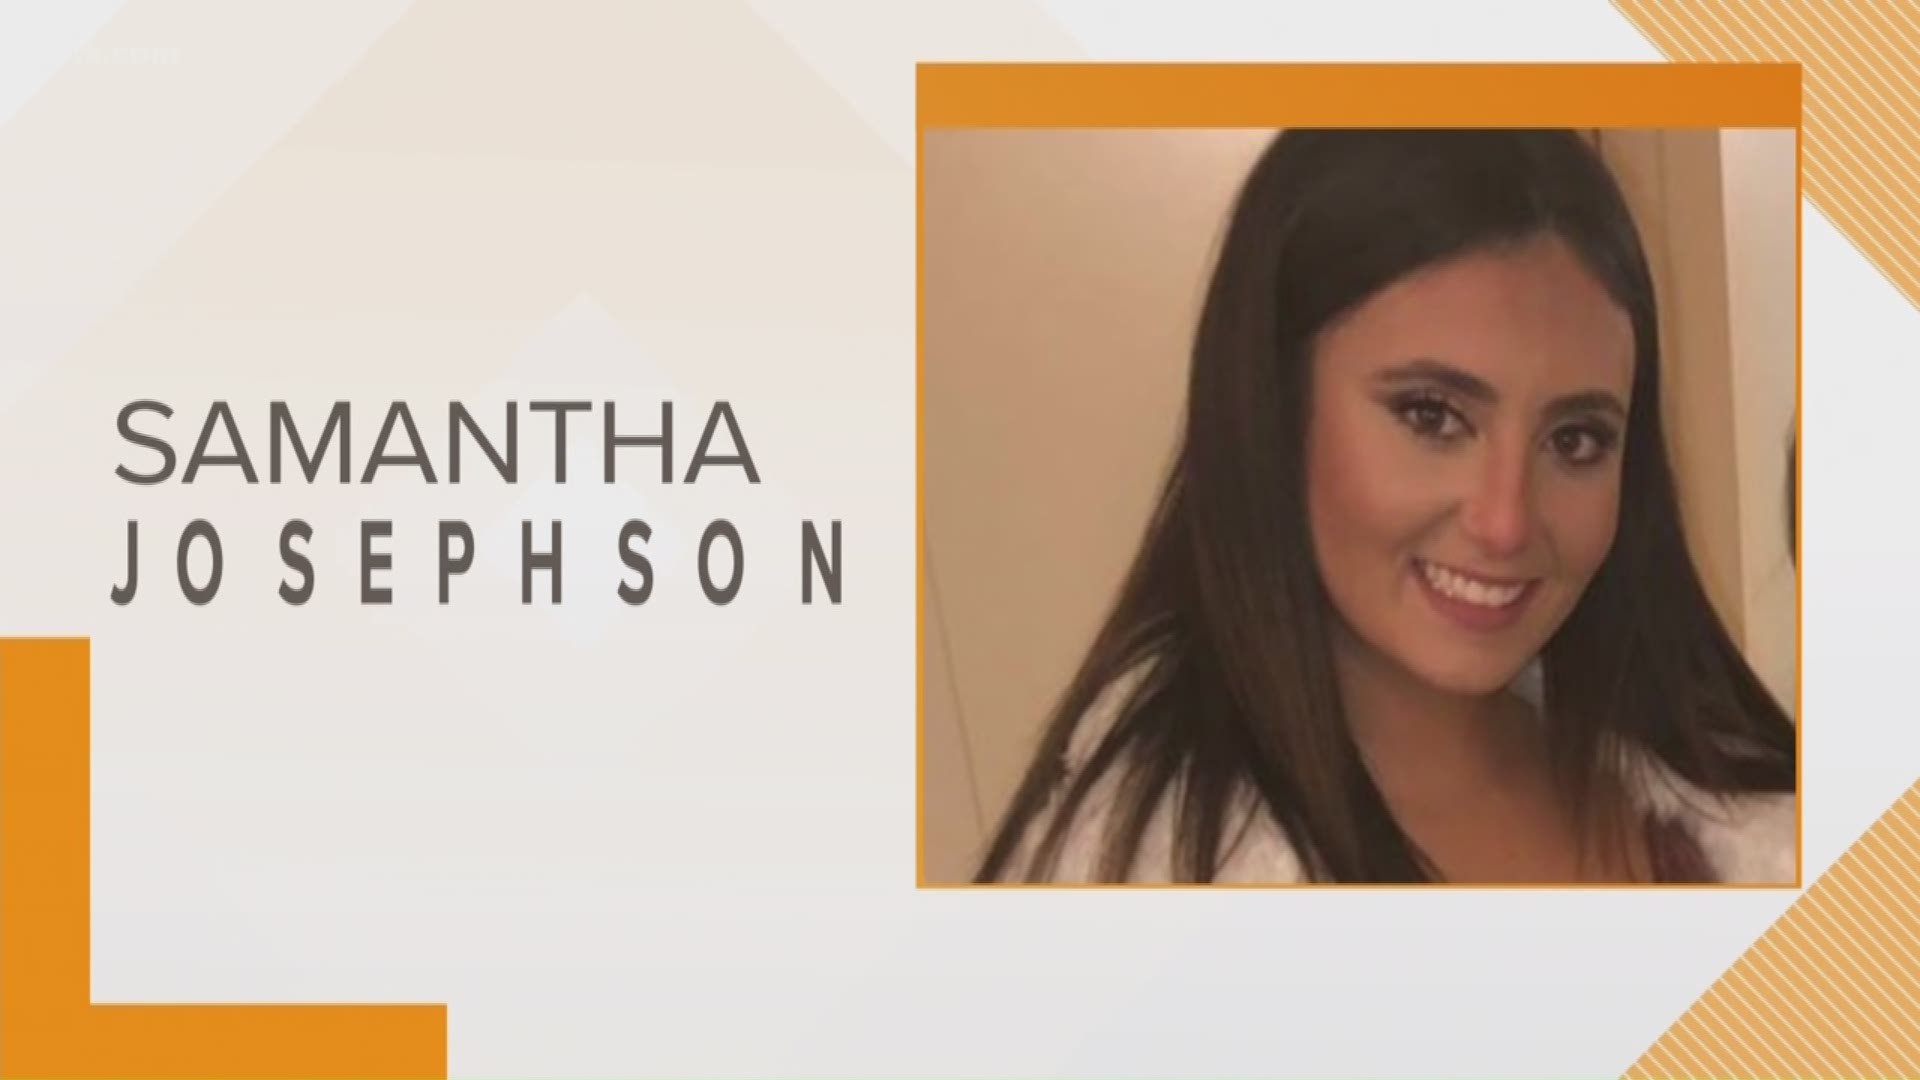 Samantha Josephson, a University of South Carolina student who was reported missing, has died, the university confirms.